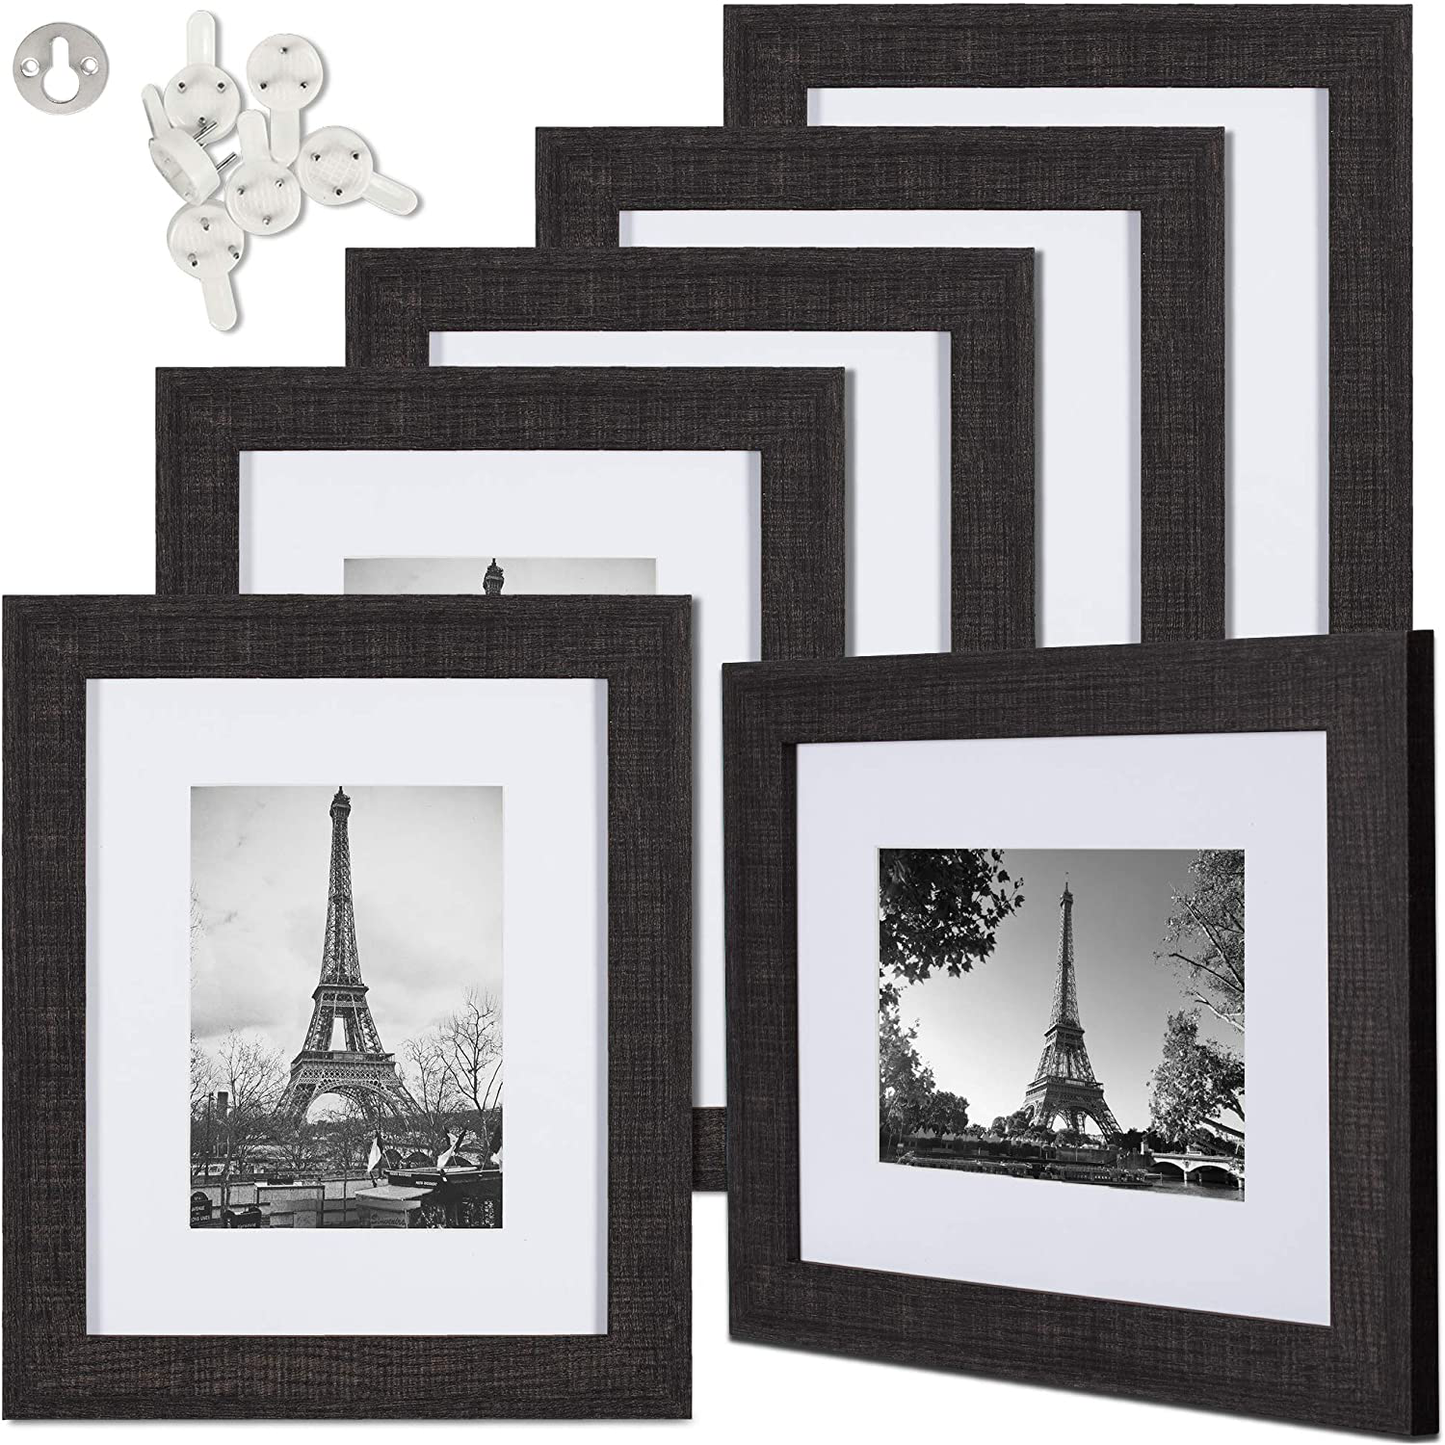 upsimples 8x10 Picture Frame Distressed Black with Real Glass,Display Pictures 5x7 with Mat or 8x10 Without Mat,Multi Photo Frames Collage for Wall or Tabletop Display,Set of 6